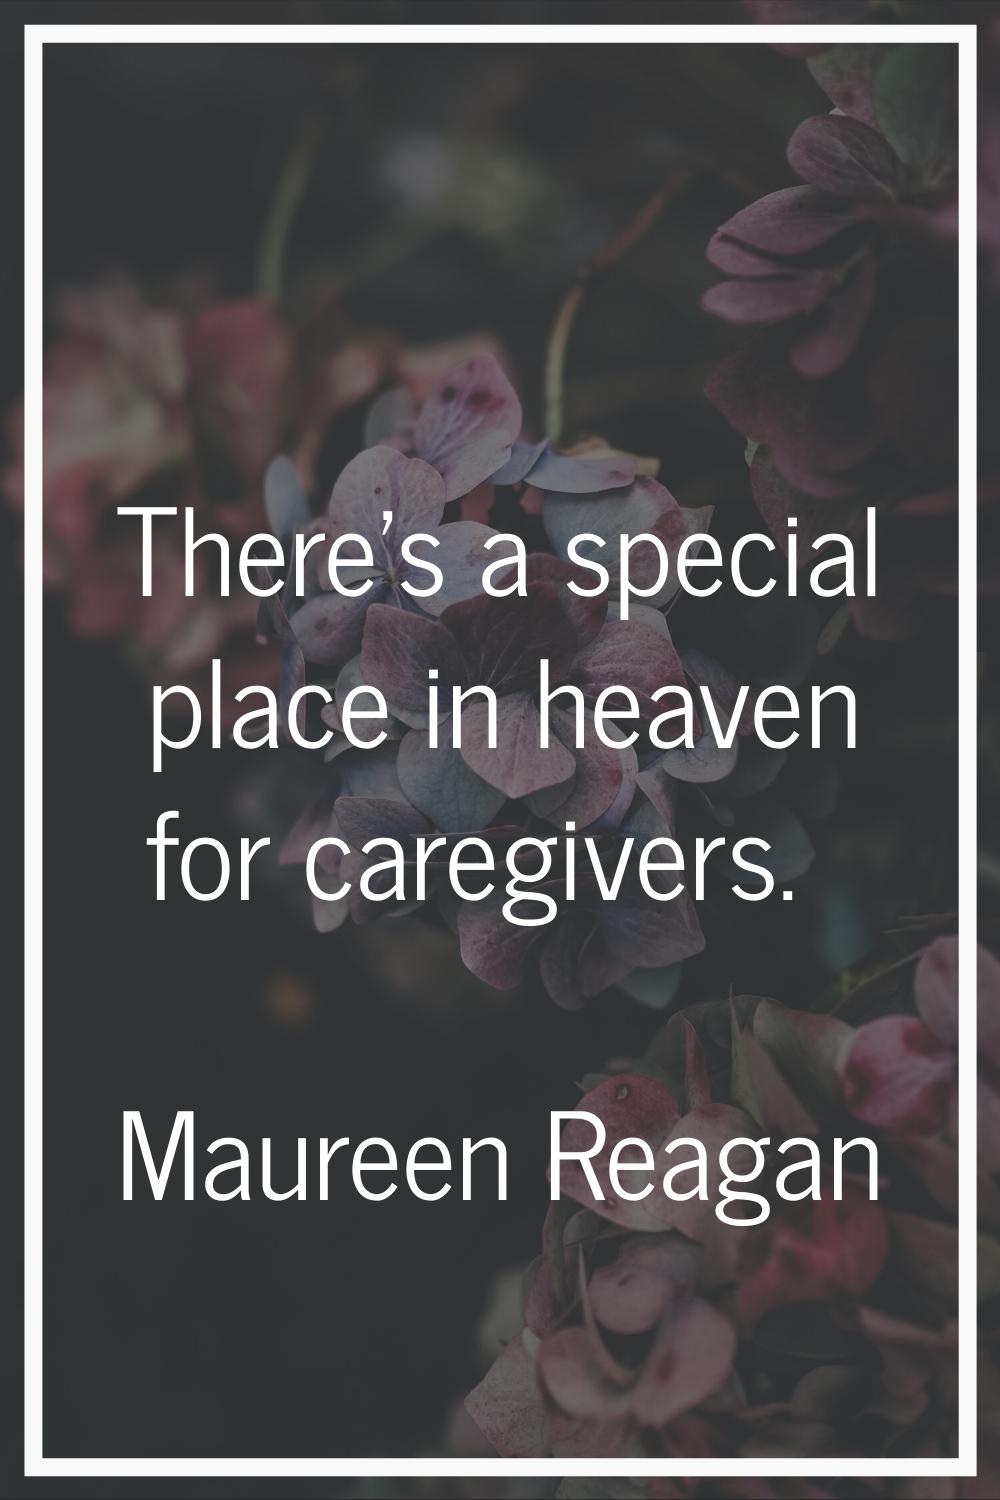 There's a special place in heaven for caregivers.